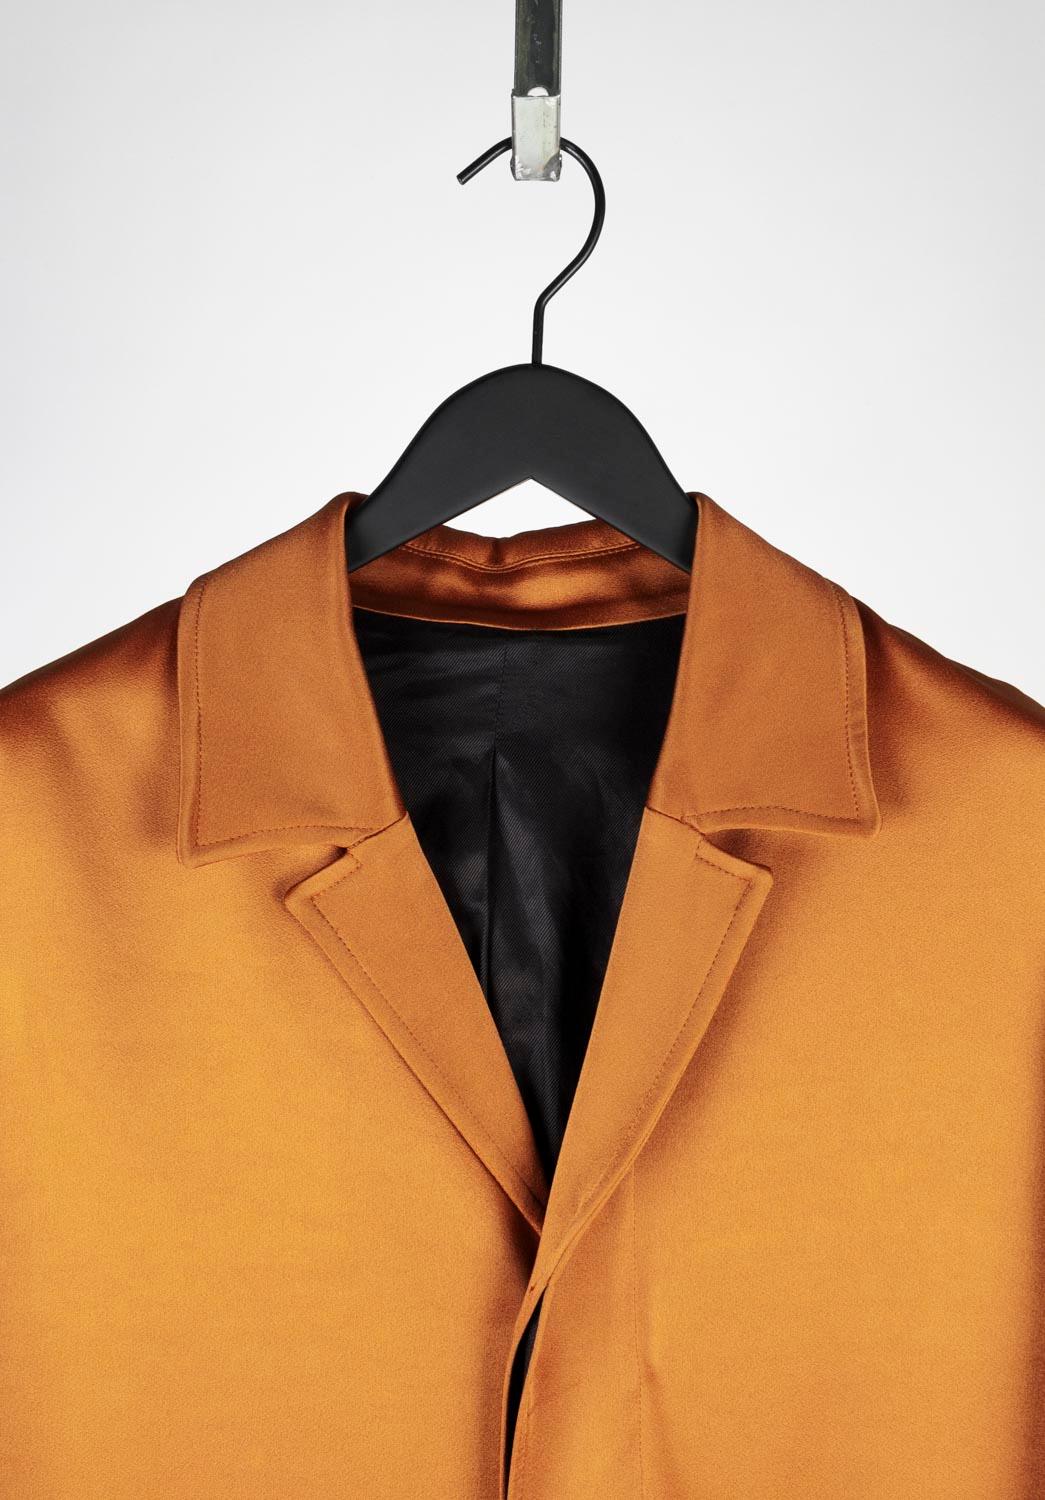 100% genuine Ami Overcoat, S616
Color: Pale orange - an actual color may a bit vary due to individual computer screen interpretation
Material: 71% acetate, 29% viscose
Tag size: 46ITA, Medium fit.
This coat is great quality item. Rate 8.5 of 10,